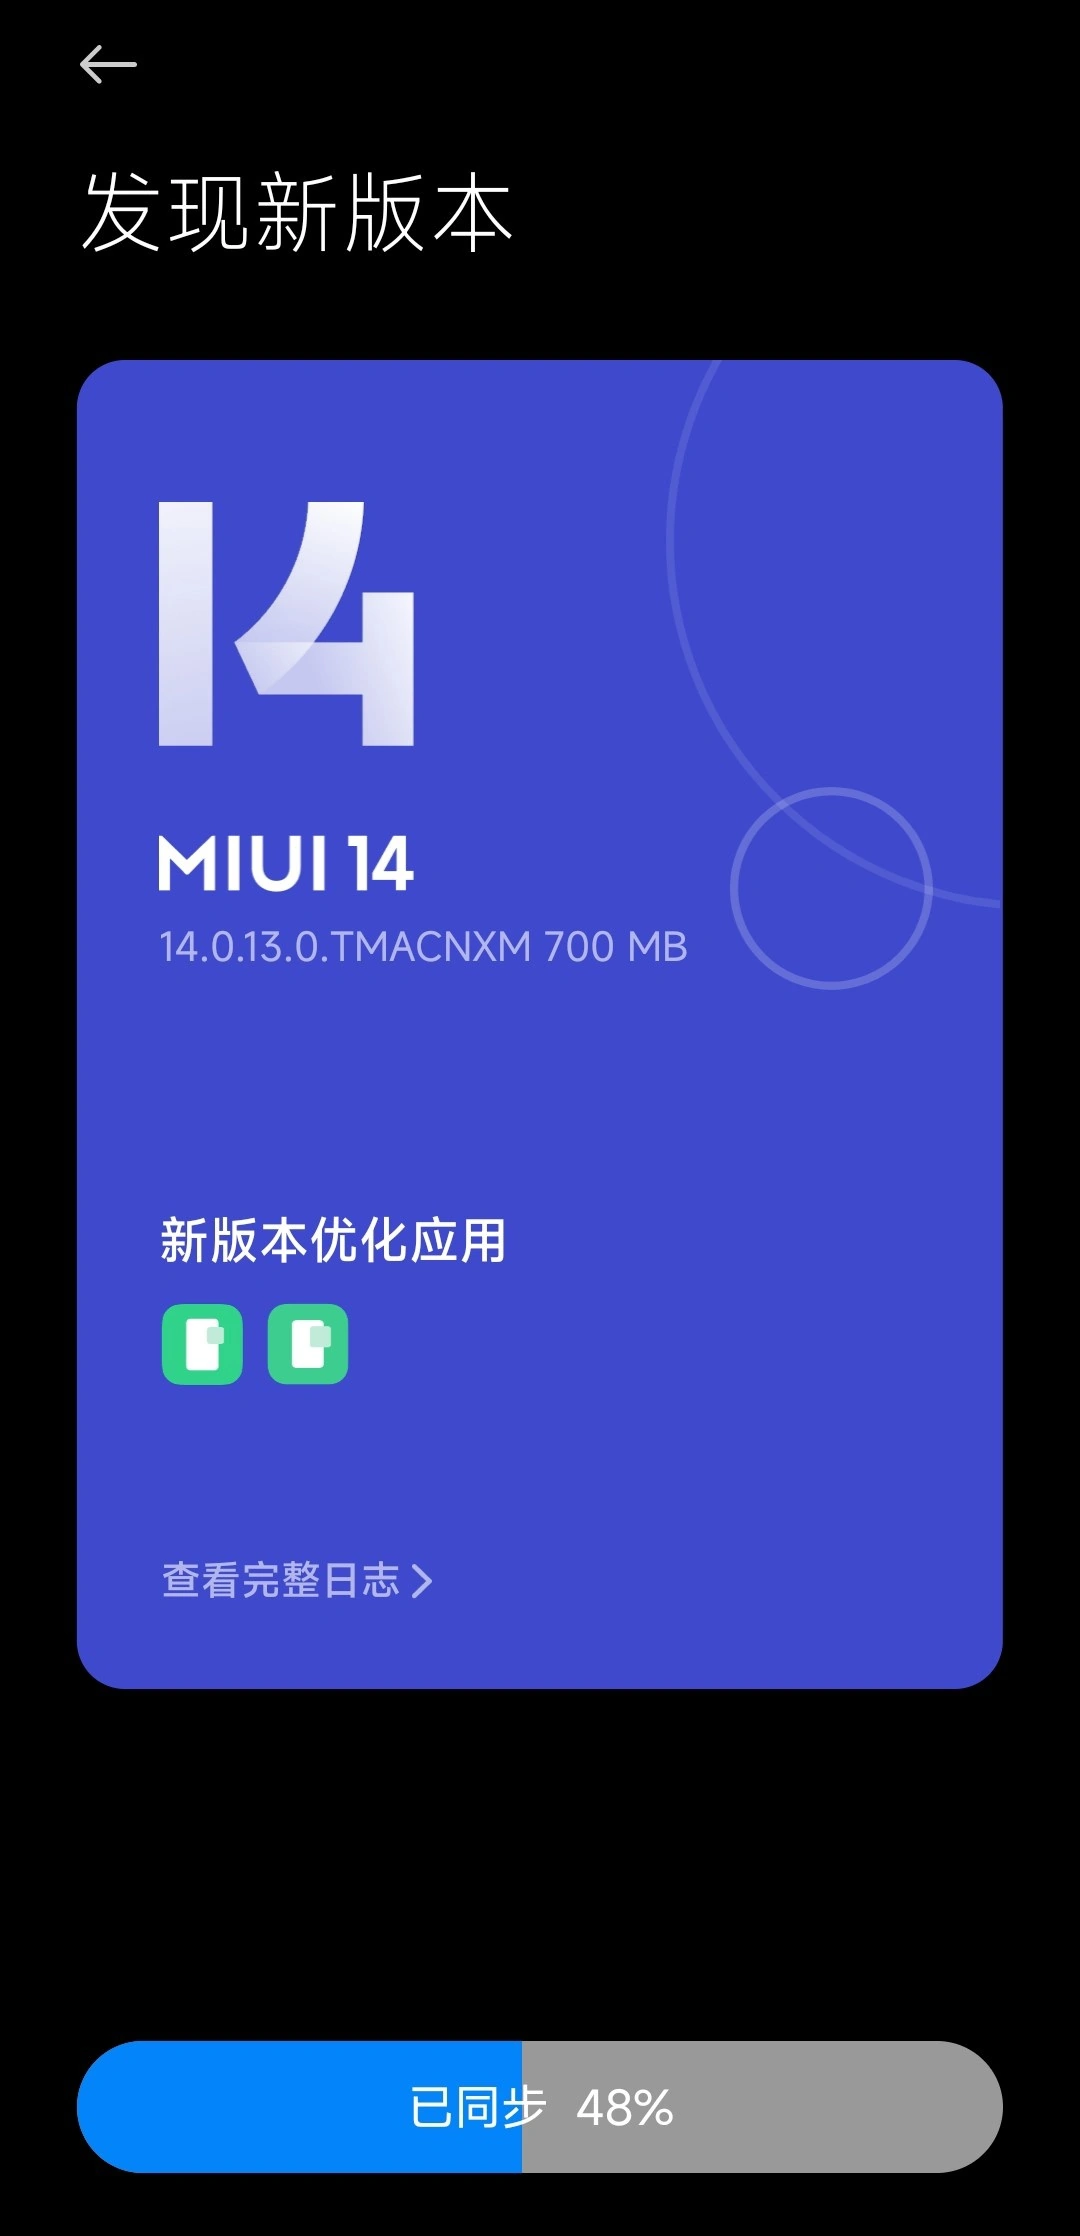 New Xiaomi 13 Ultra stable update 